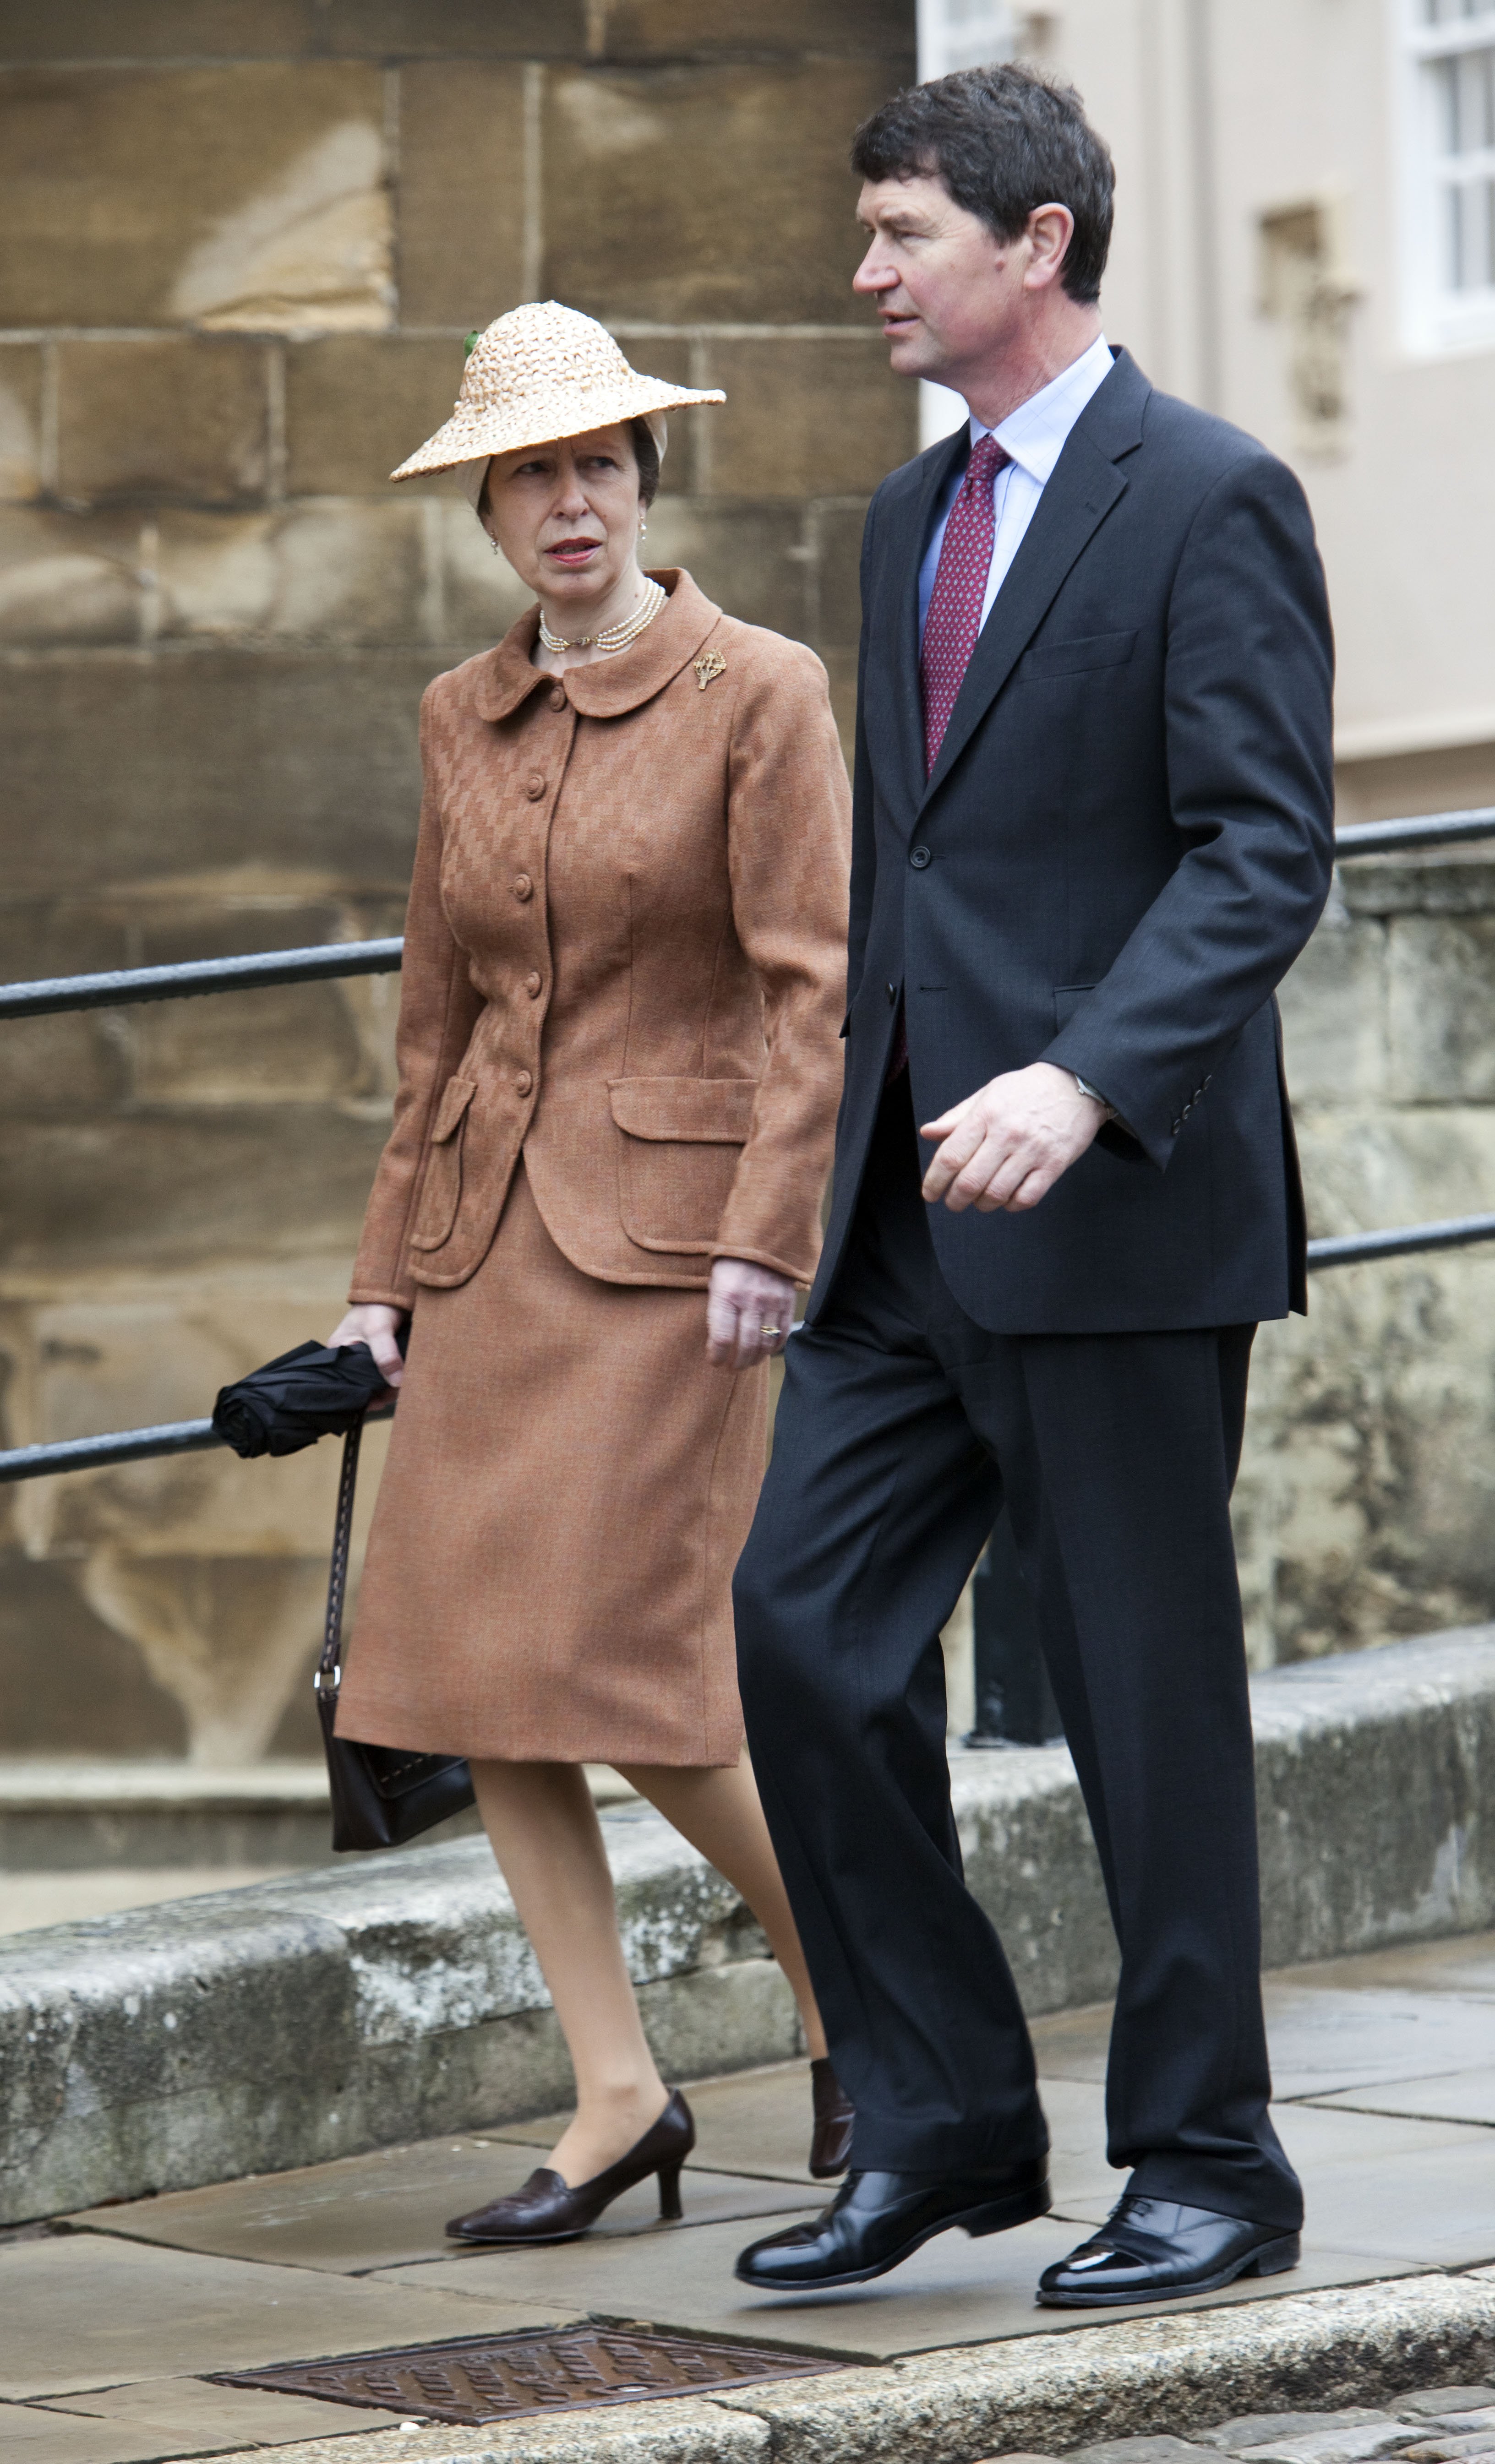 Princess Anne And Tim Laurence Attend Church On Easter Sunday At Windsor Castle in April 2009 | Source: Getty Images